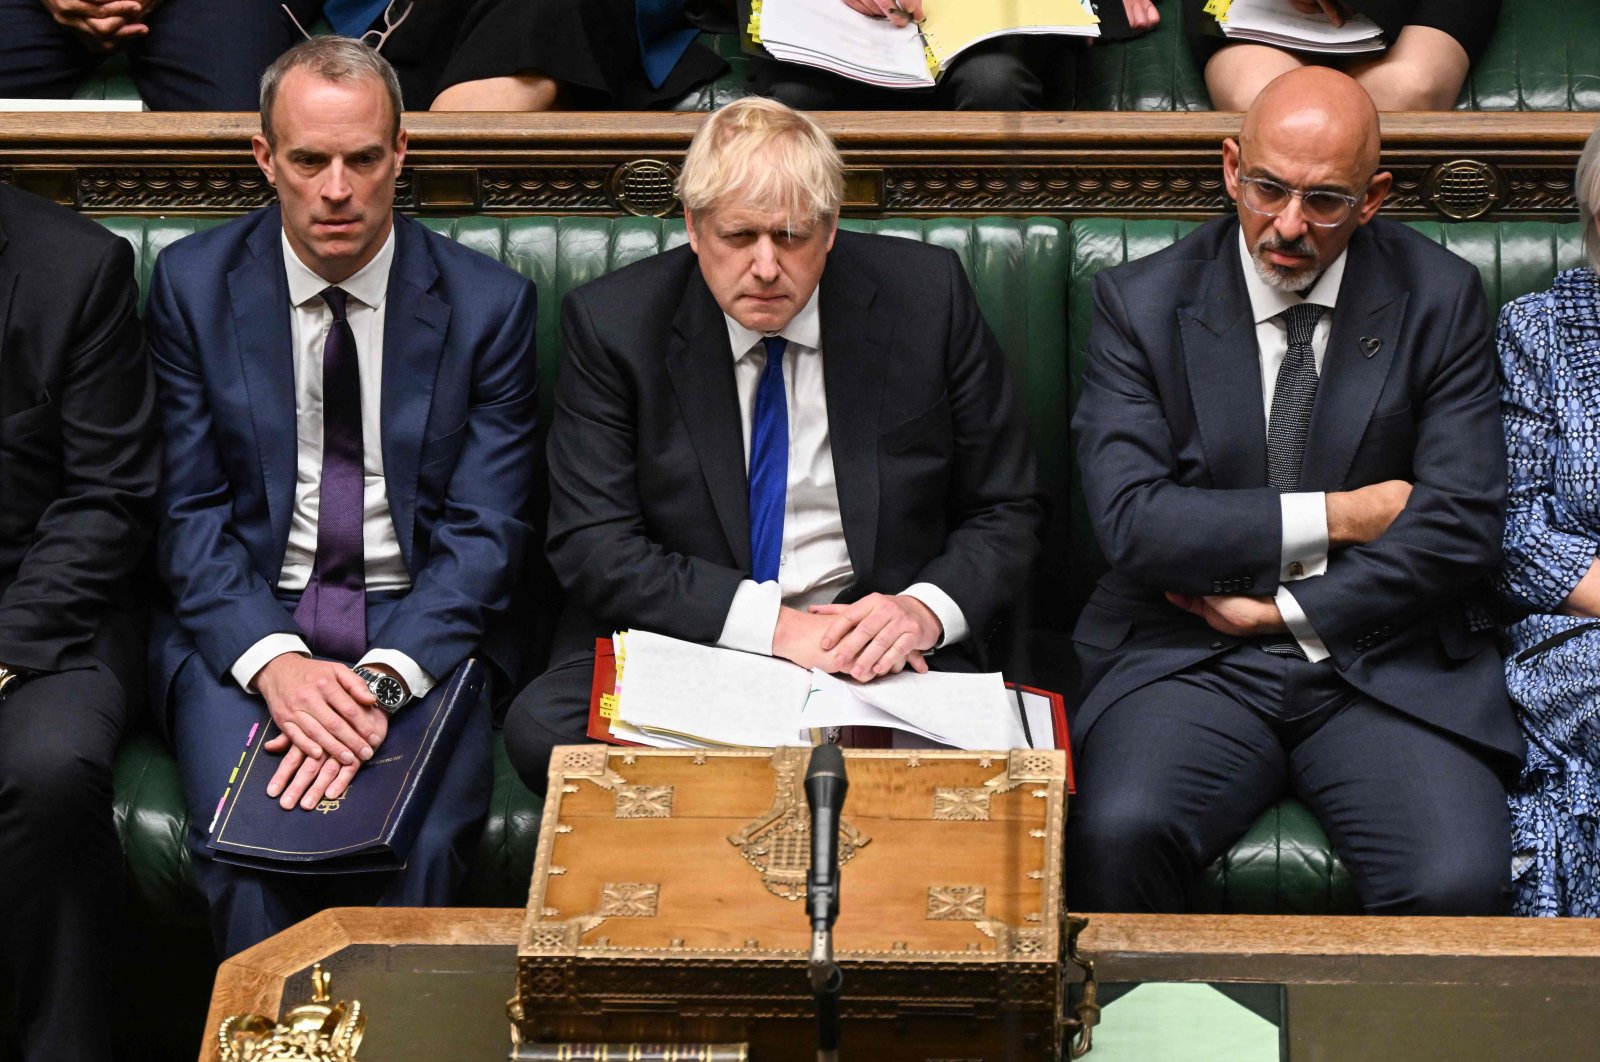 A handout photograph released by the UK Parliament shows Britain&#039;s Prime Minister Boris Johnson (C) flanked by Britain&#039;s Justice Secretary and deputy Prime Minister Dominic Raab (L) and Britain&#039;s new Chancellor of the Exchequer Nadhim Zahawi (R) during prime minister&#039;s questions in the House of Commons in London, U.K., July 6, 2022. (Jessica Taylor via AFP)